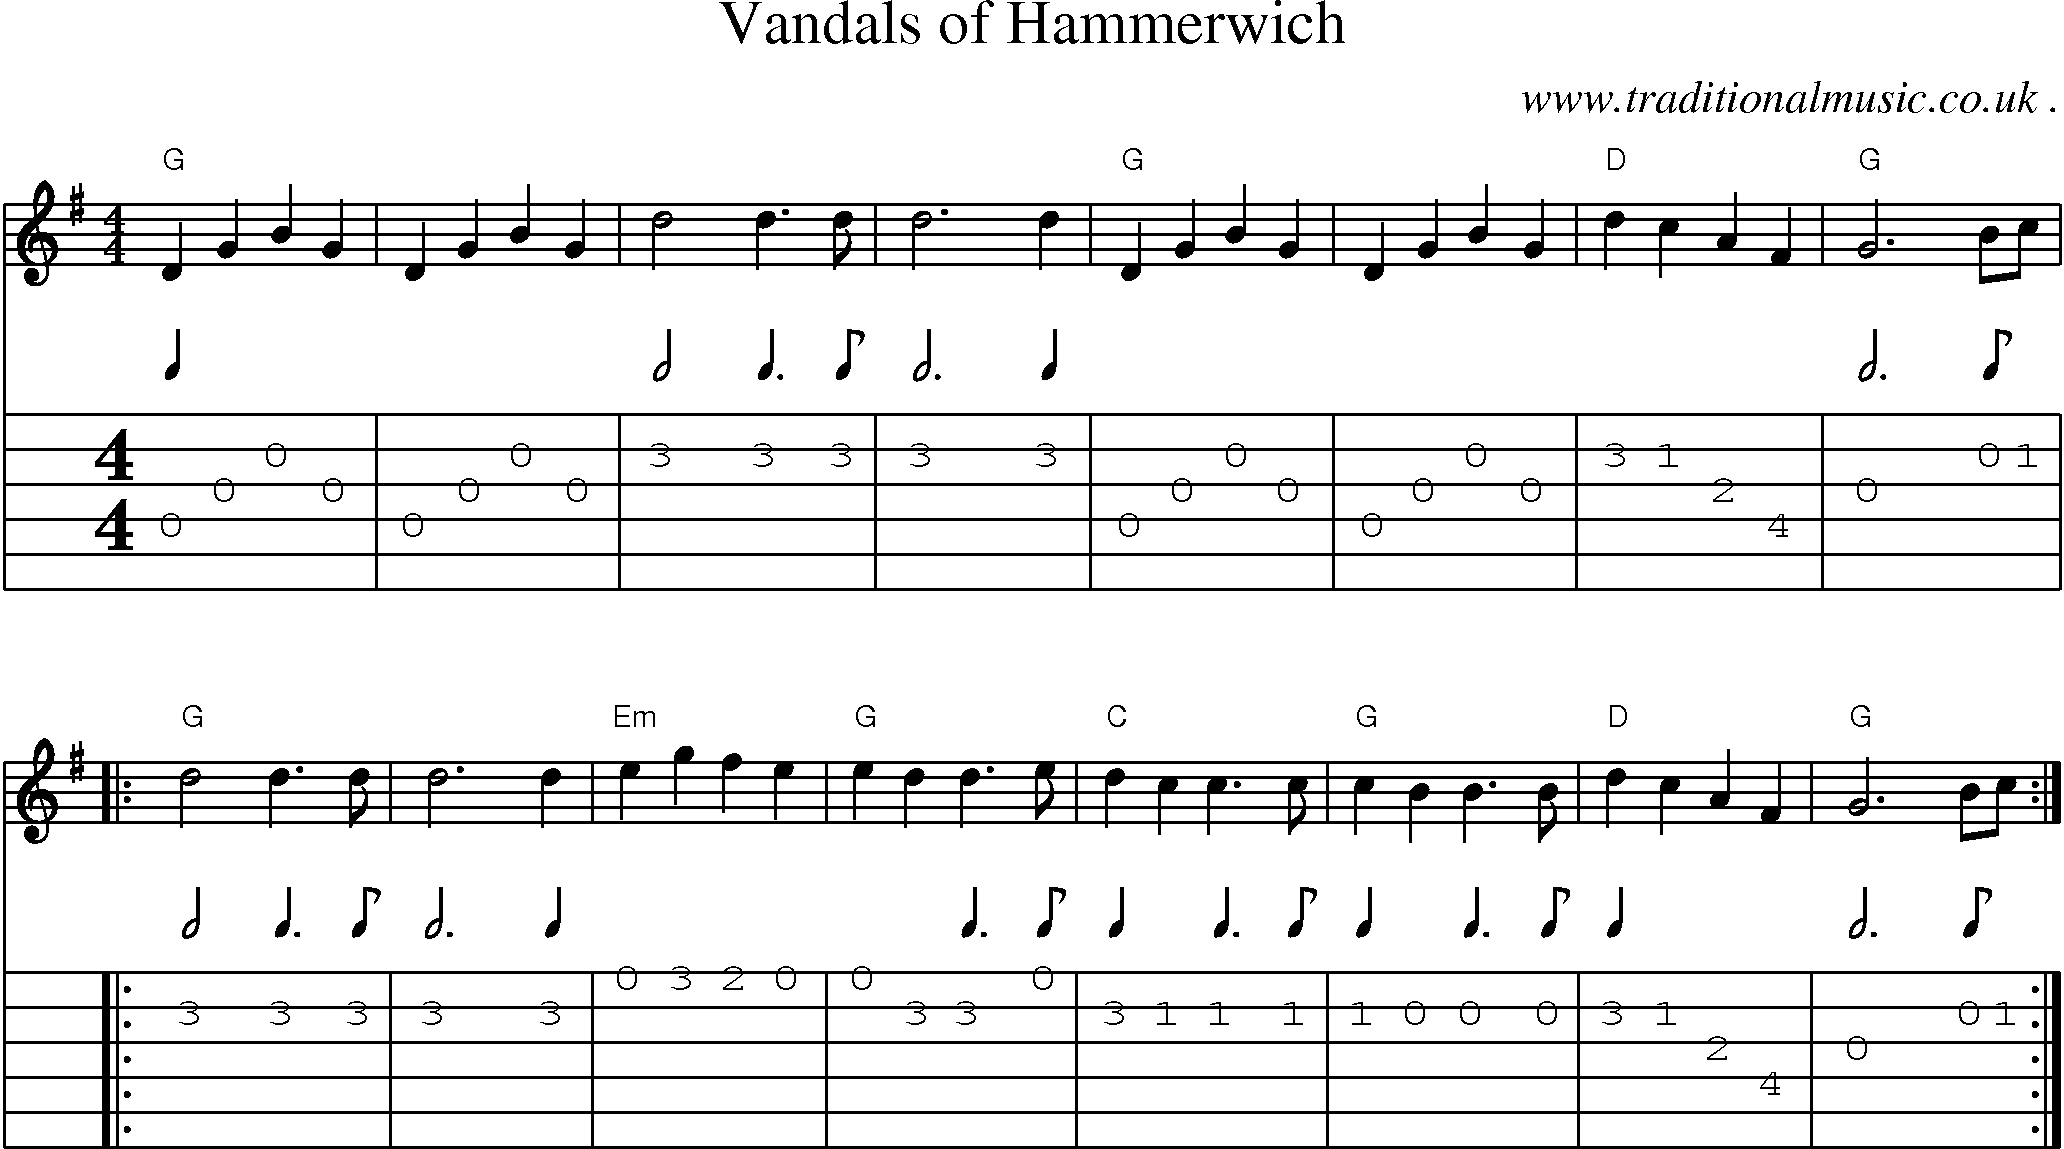 Music Score and Guitar Tabs for Vandals of Hammerwich